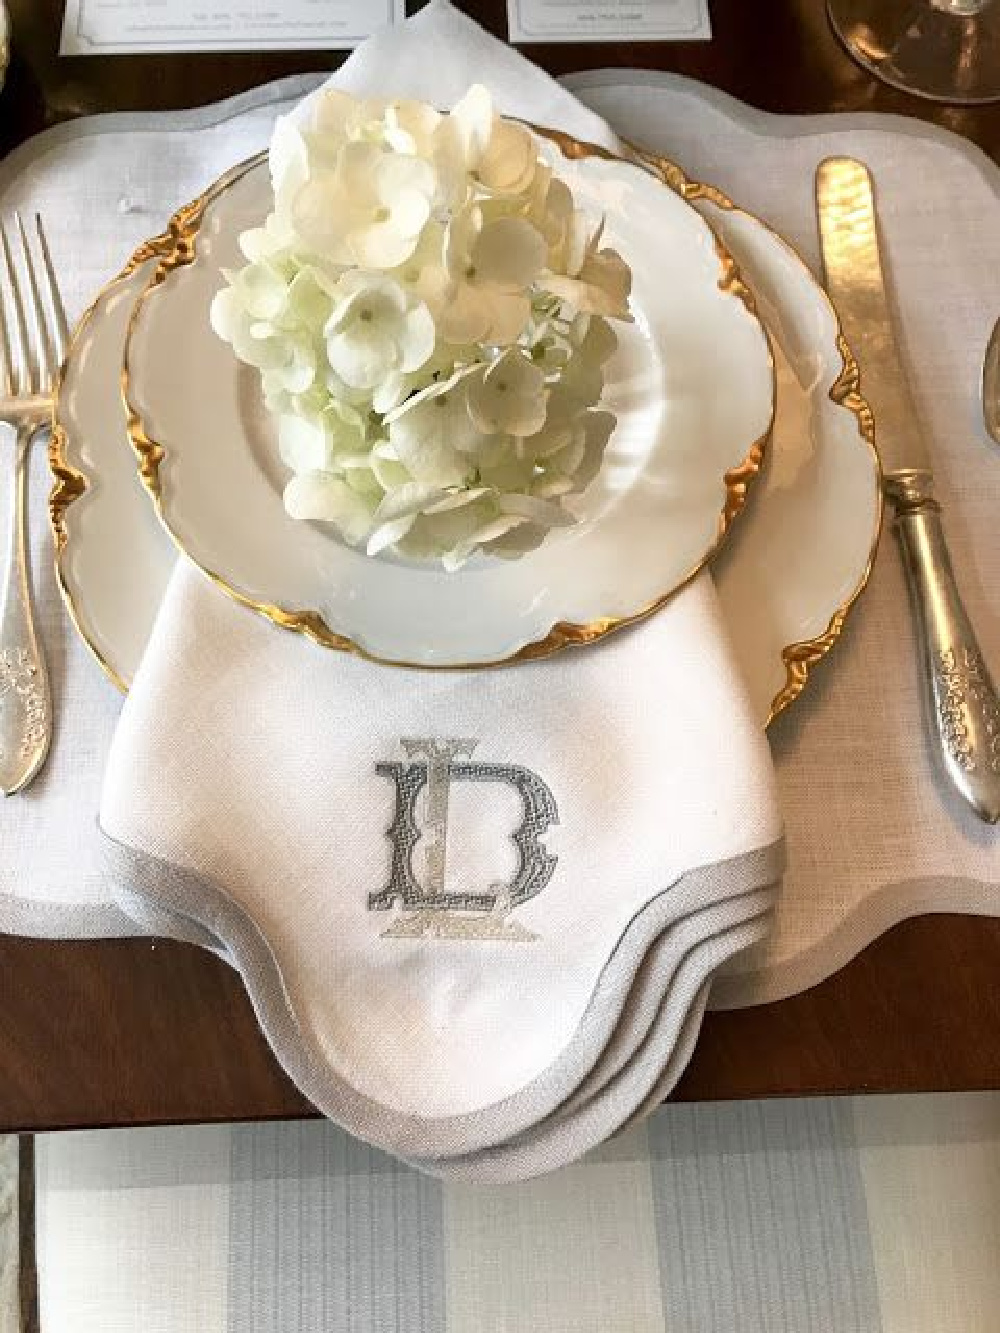 Beautifully elegant placesetting in the dining area of a deisgner showhouse in Atlanta - Lauren DeLoach. #placesetting #tablescape #traditionalstyle #interiordesign #antiques